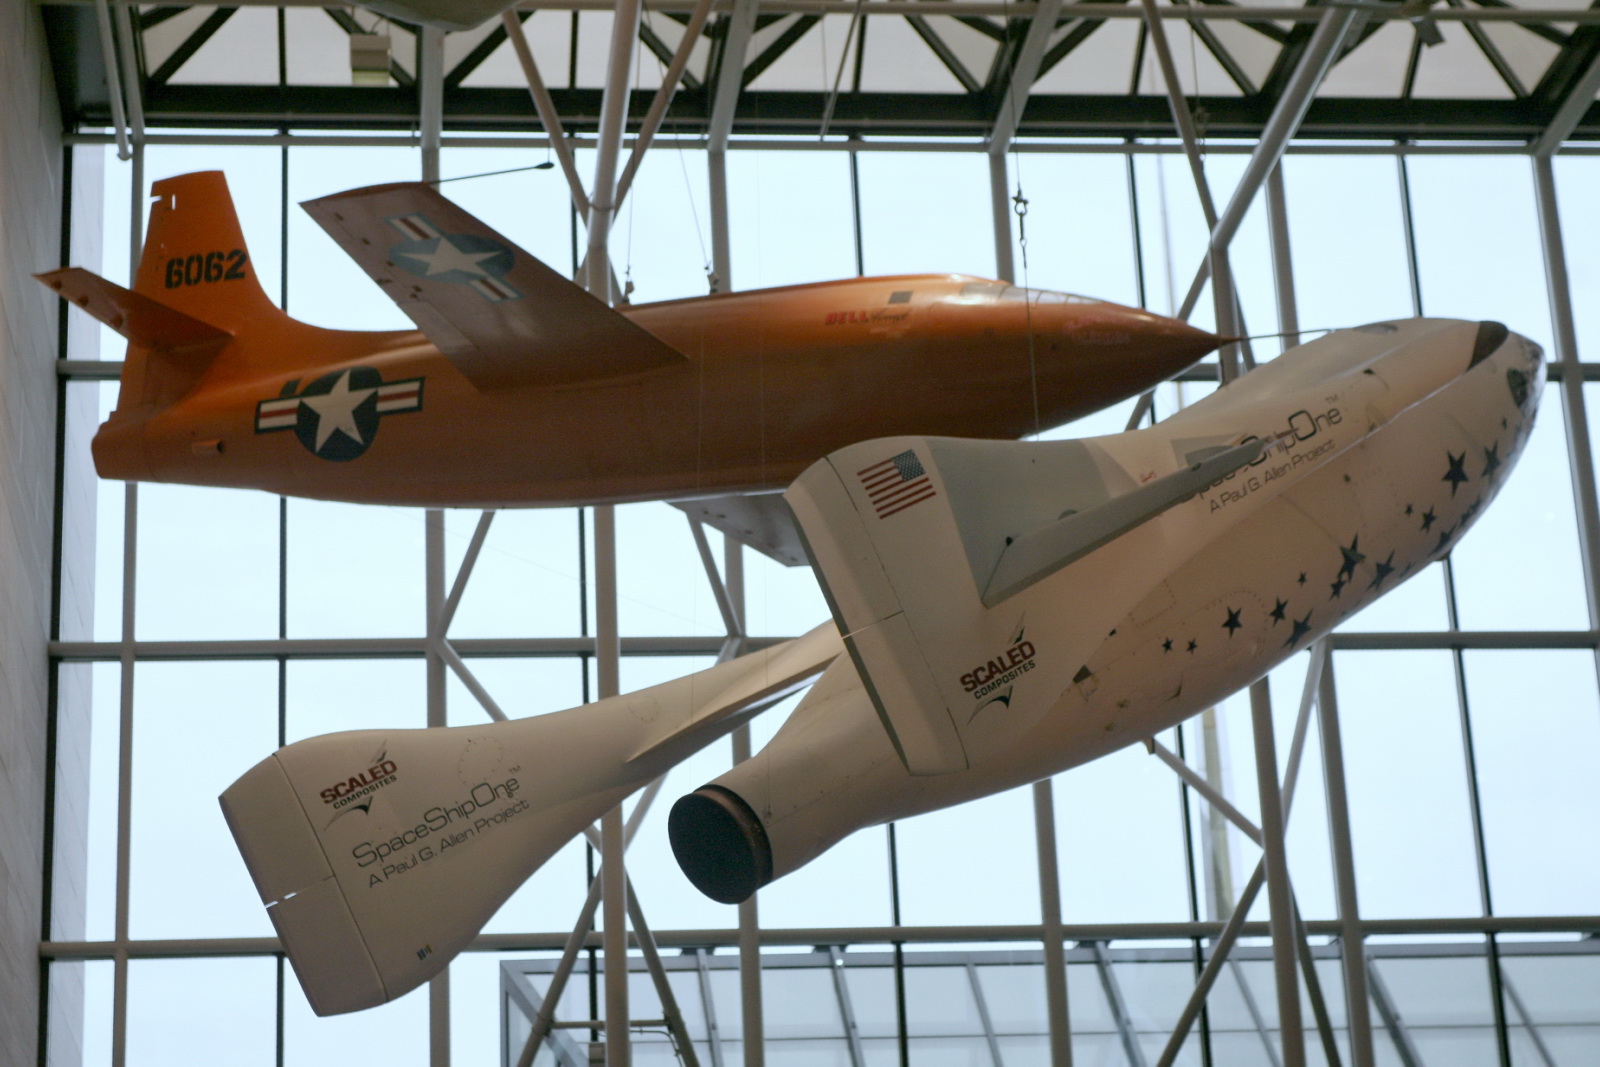 two remote controlled models of airplanes suspended from the ceiling